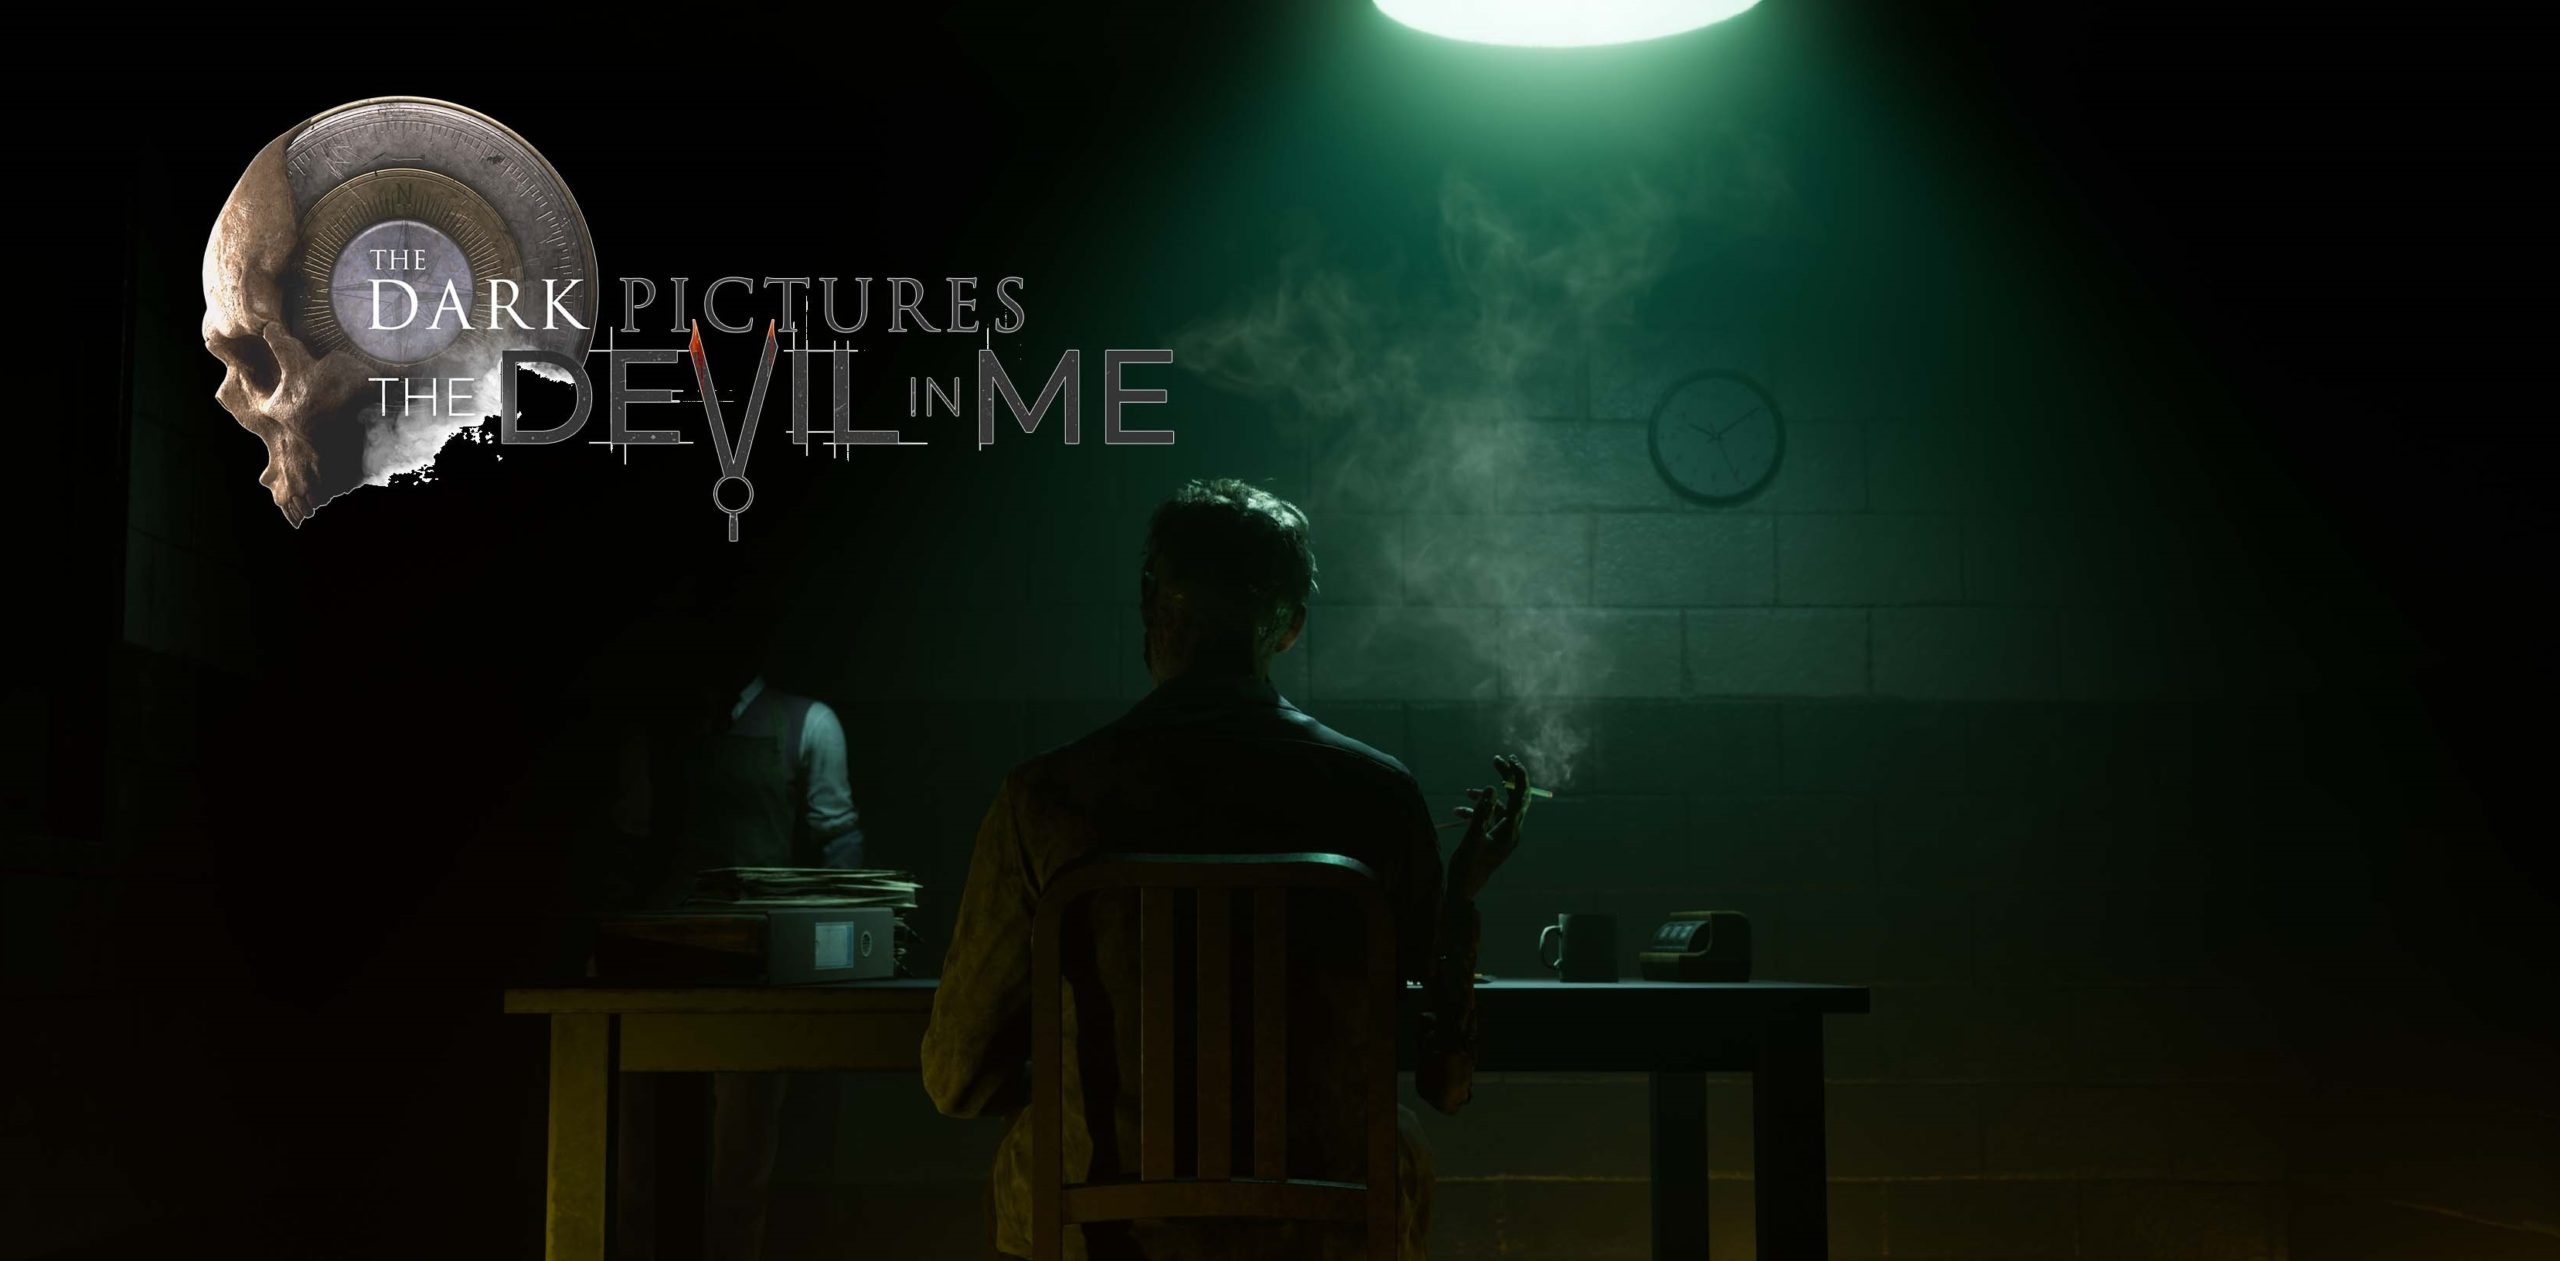 The Dark Pictures: The Devil in Me: Video game, based on the infamous Henry Howard Holmes and his hotel "Murder Castle". 2560x1270 Dual Screen Background.